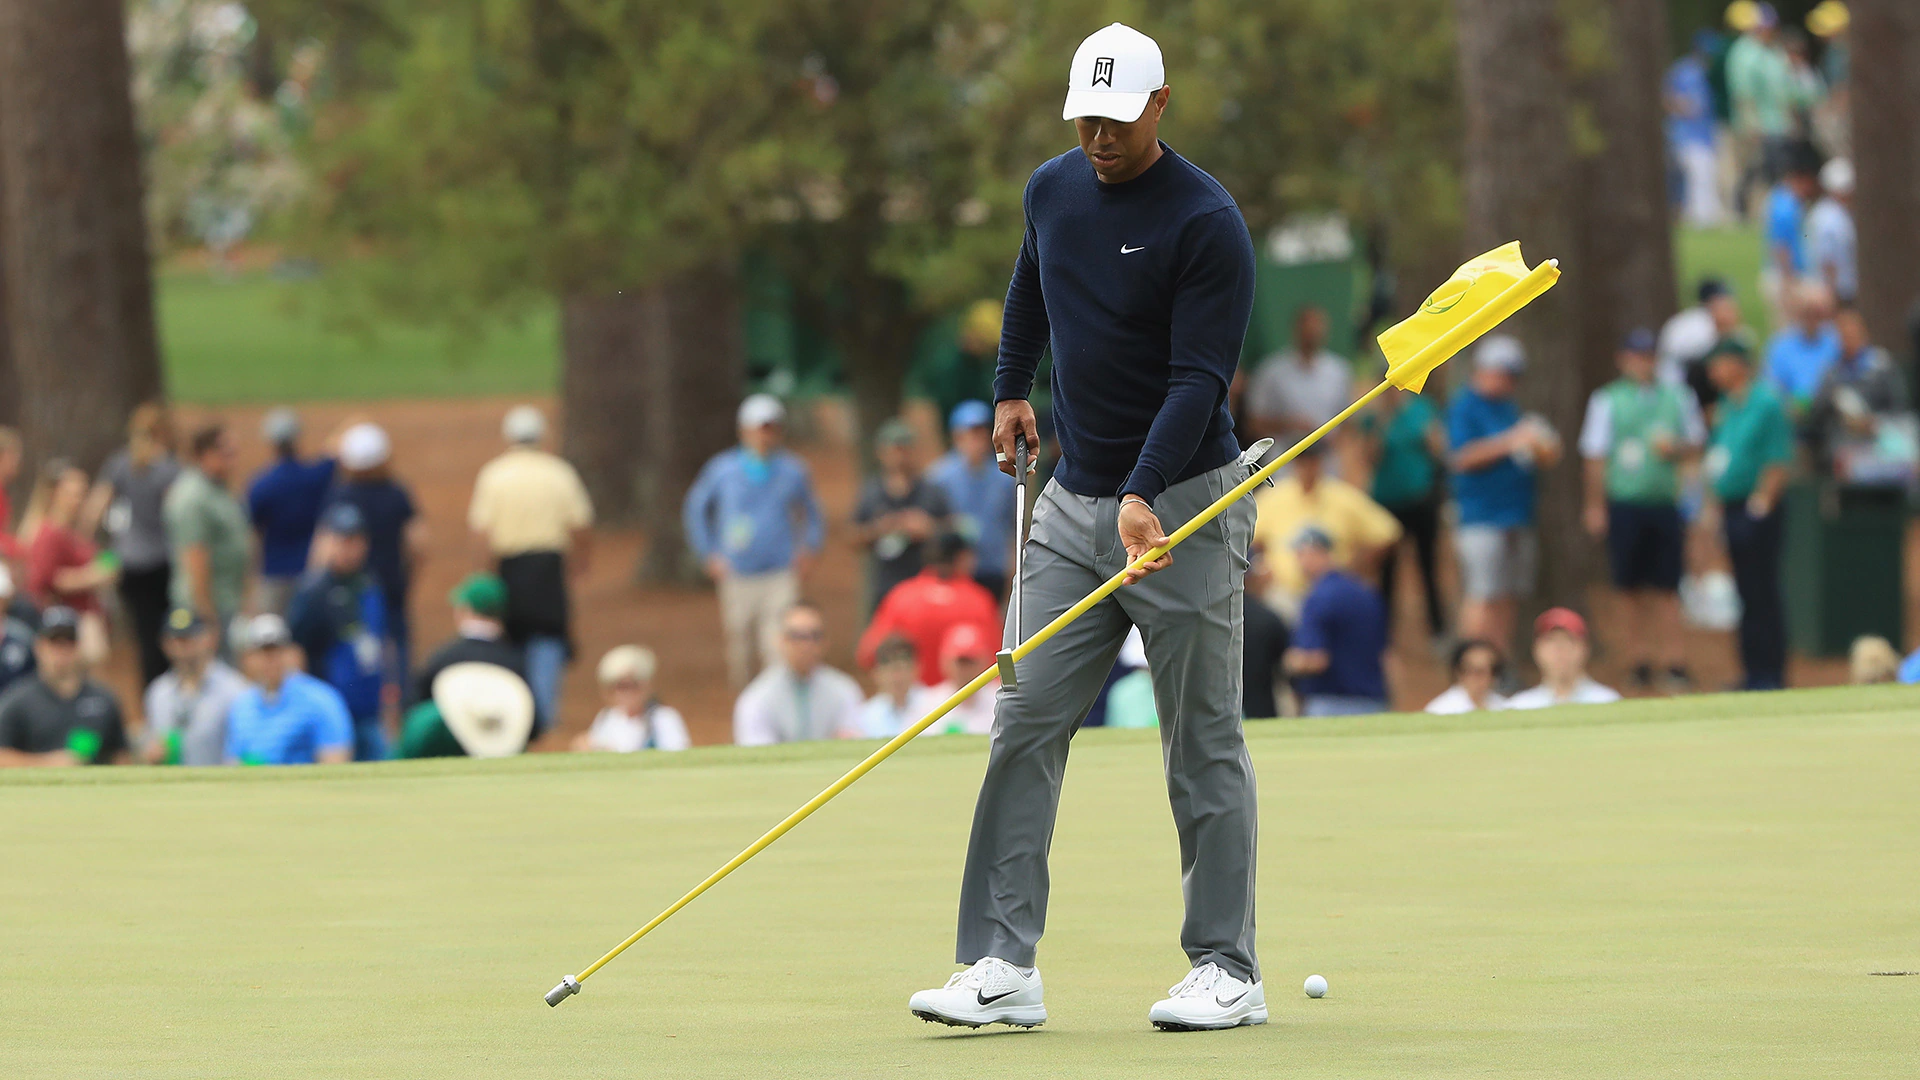 Woods: Putting with the pin in could be 'advantageous' at Augusta